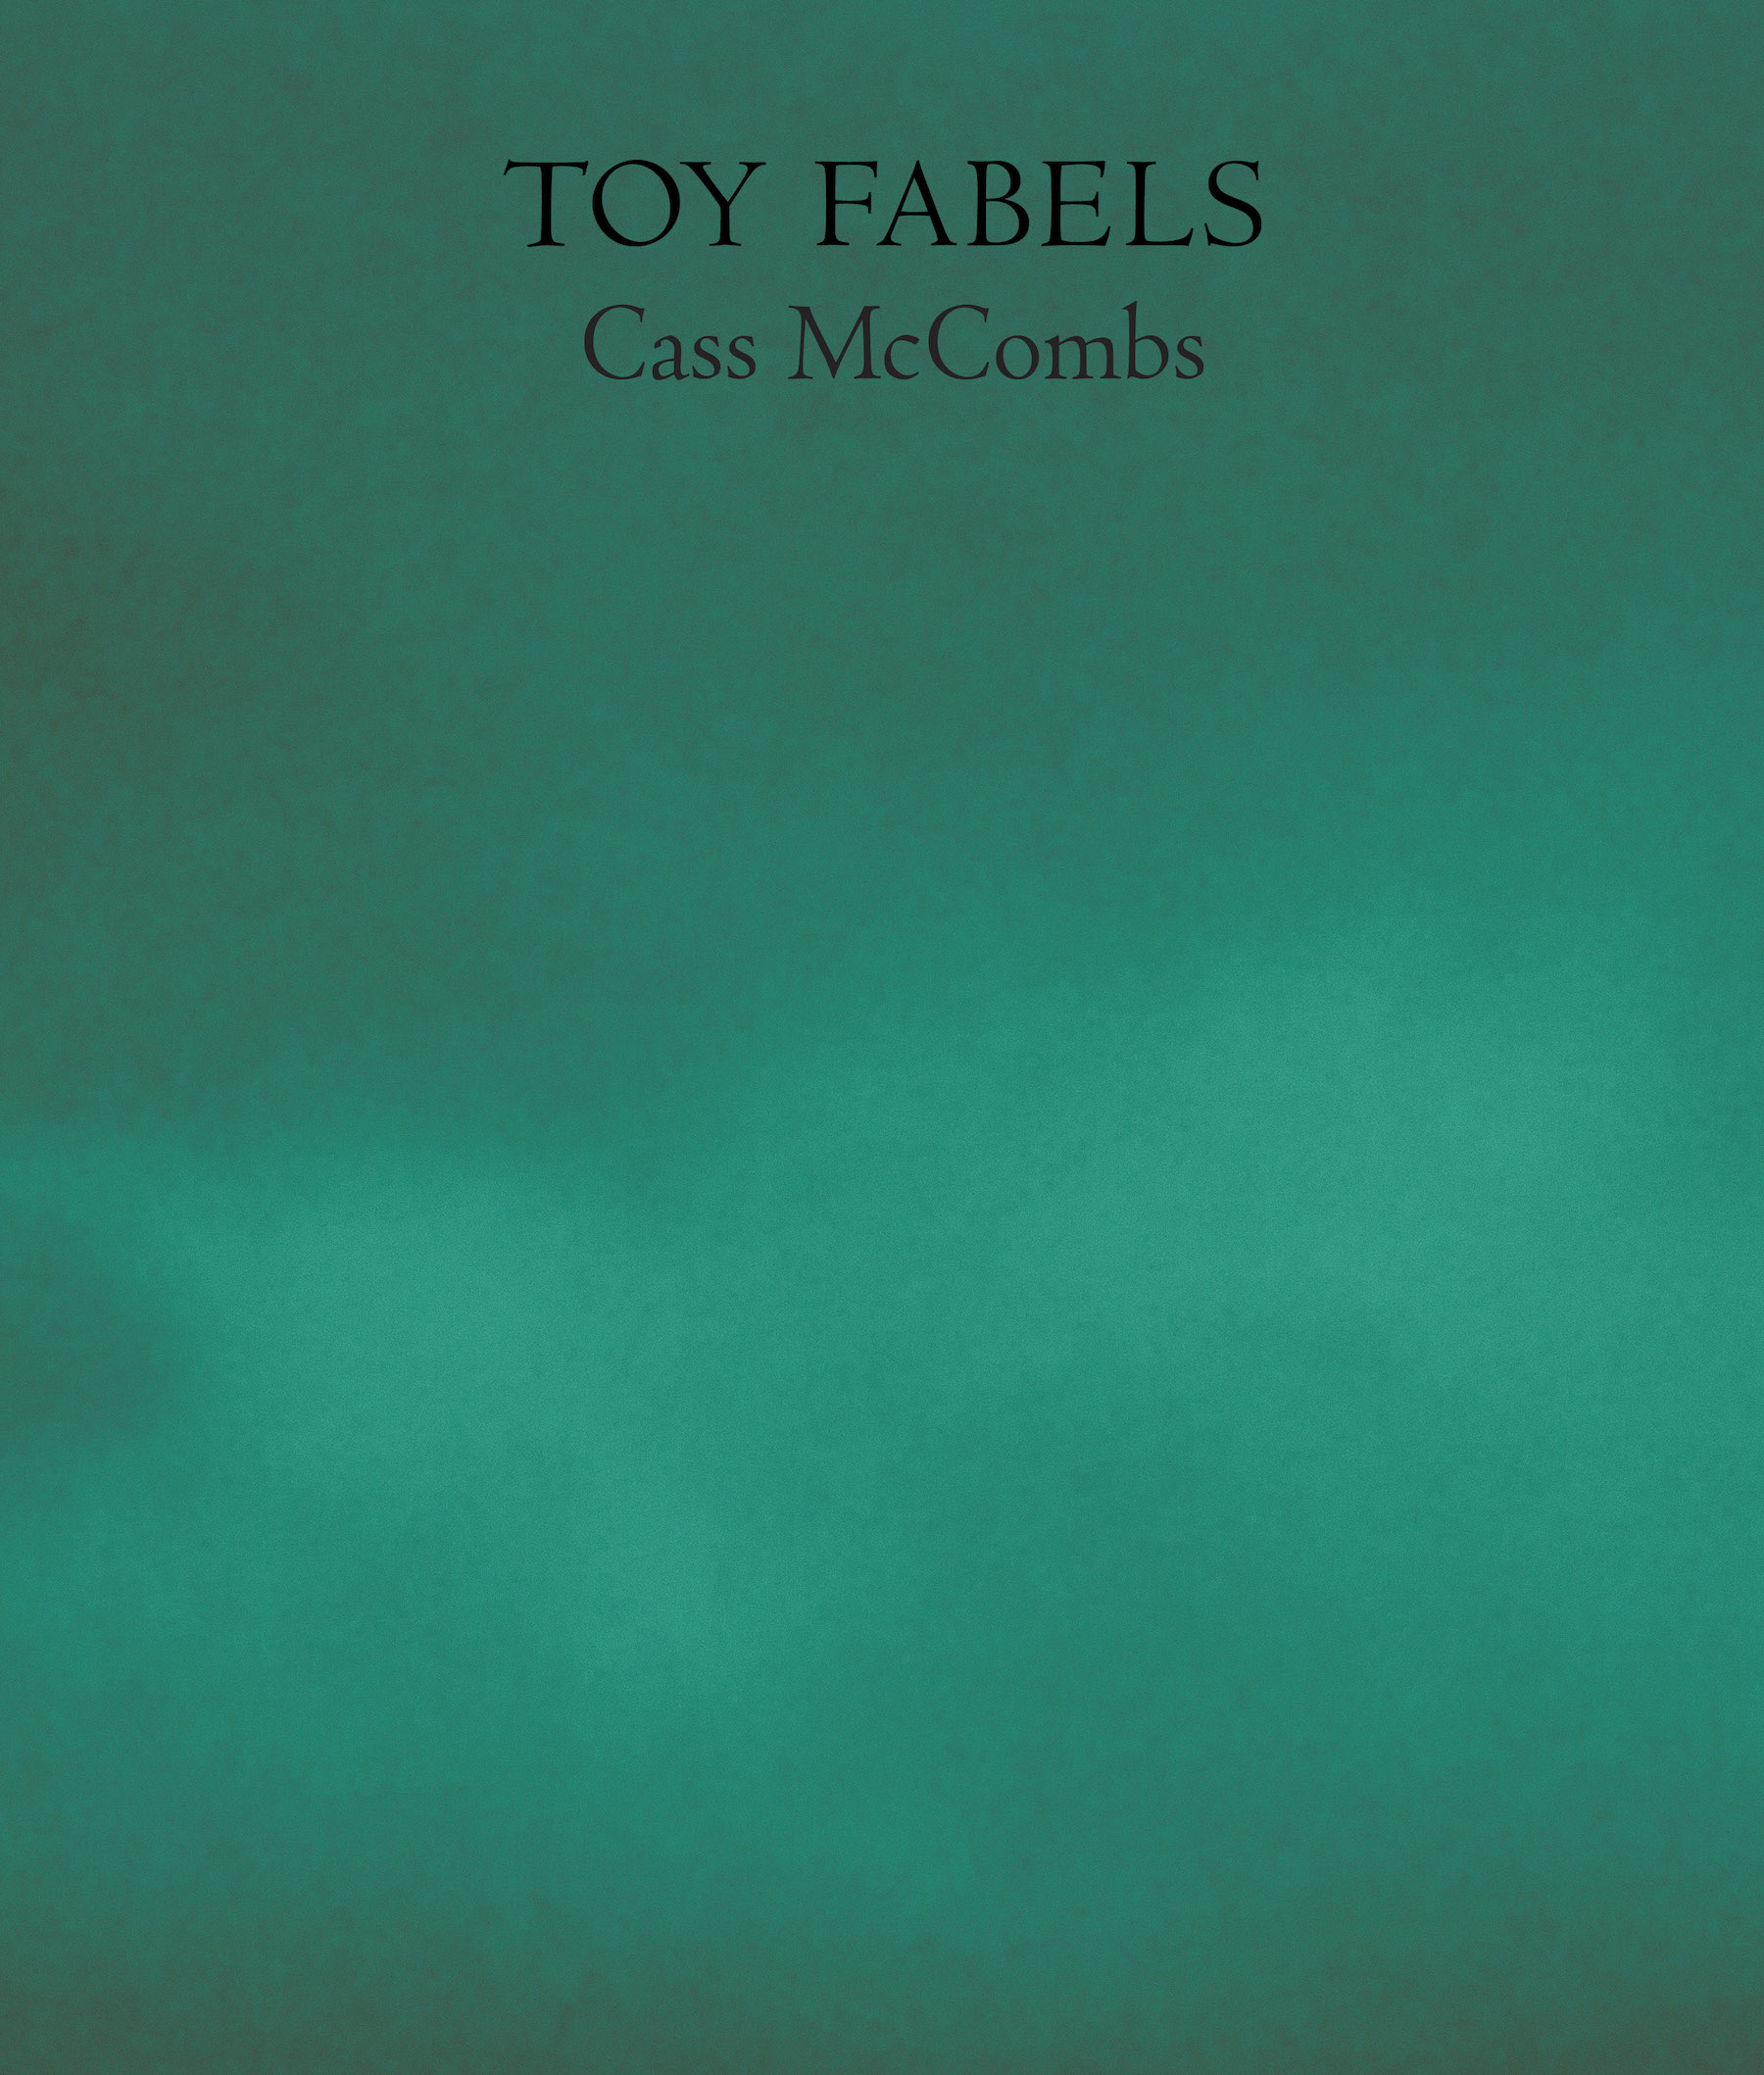 ToyFabels_cover.jpg